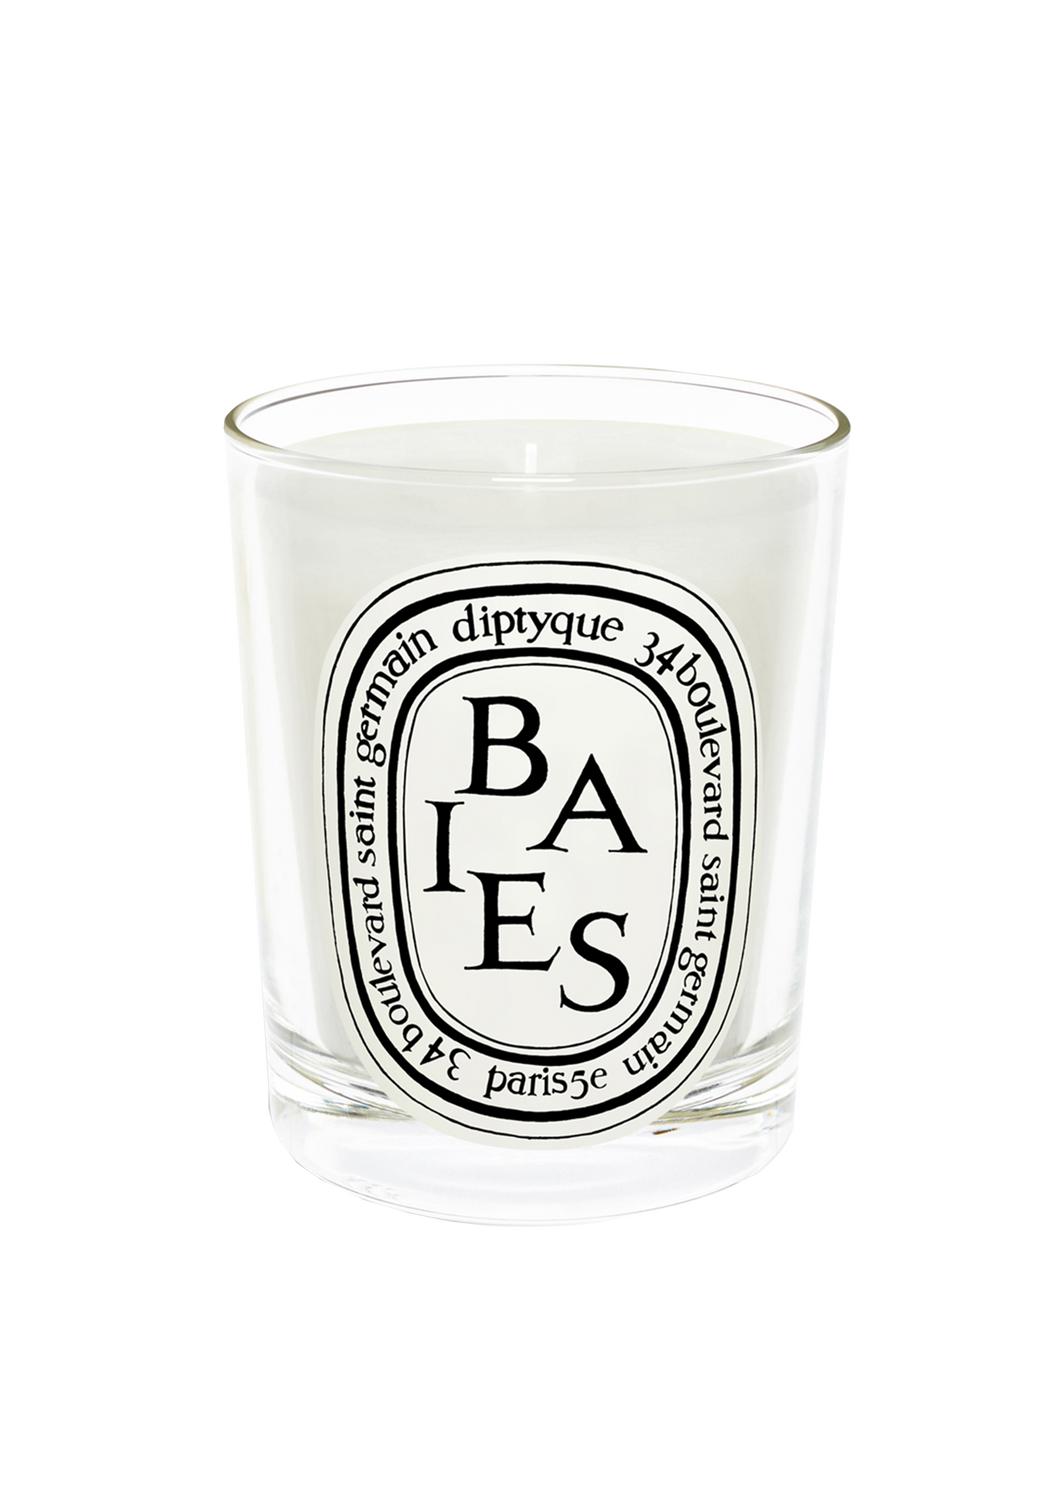 Diptyque 190g Baies Candle